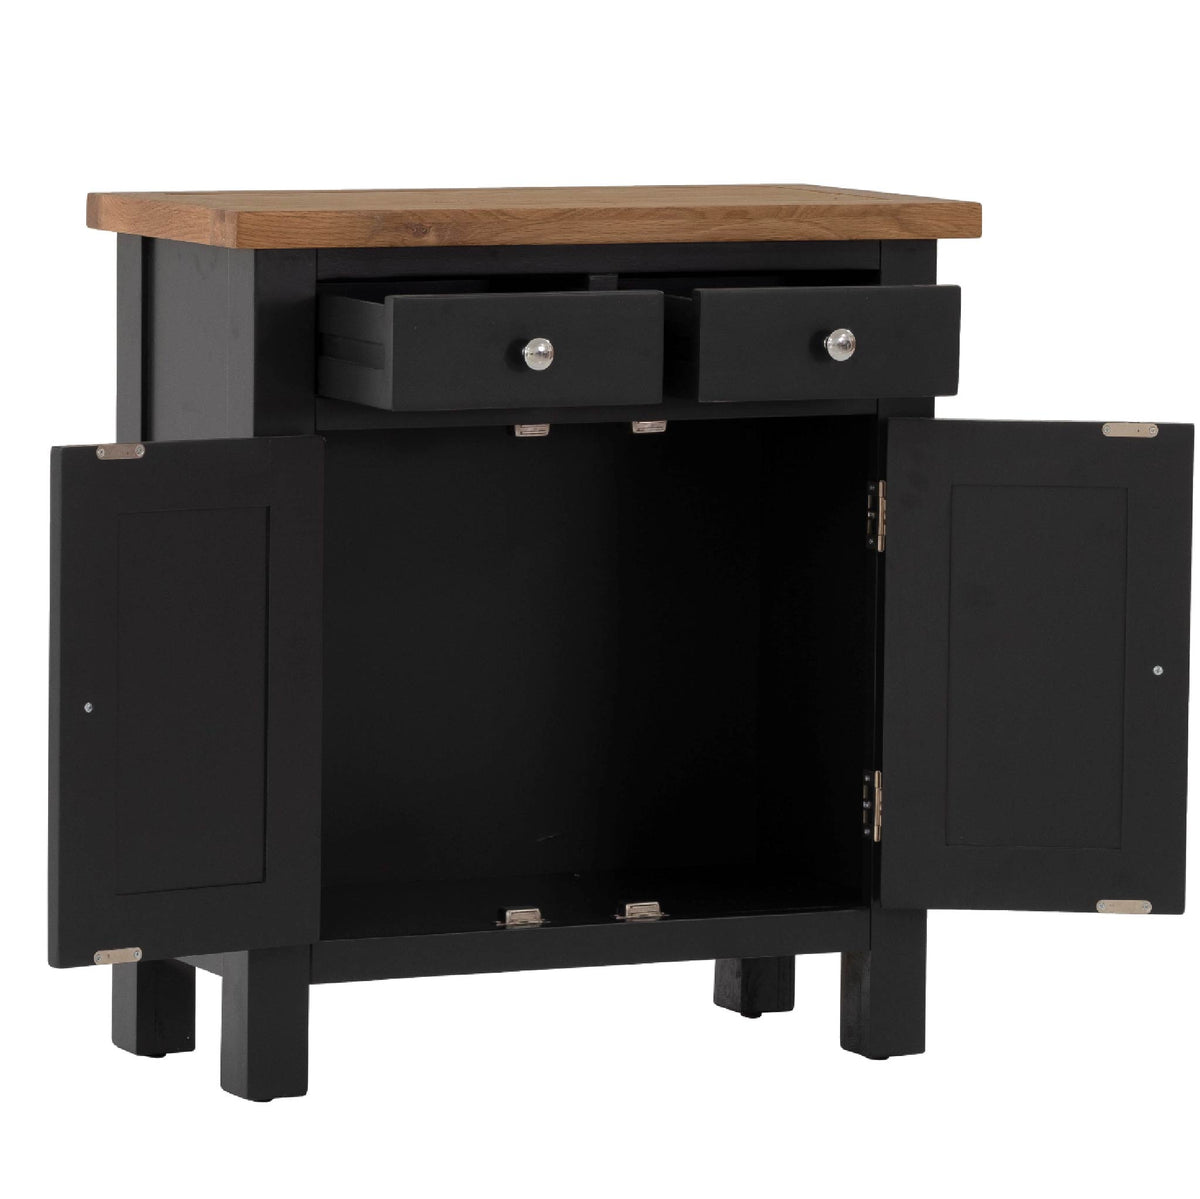 Charlestown Black Small Sideboard - With Drawers and Cupboards Open